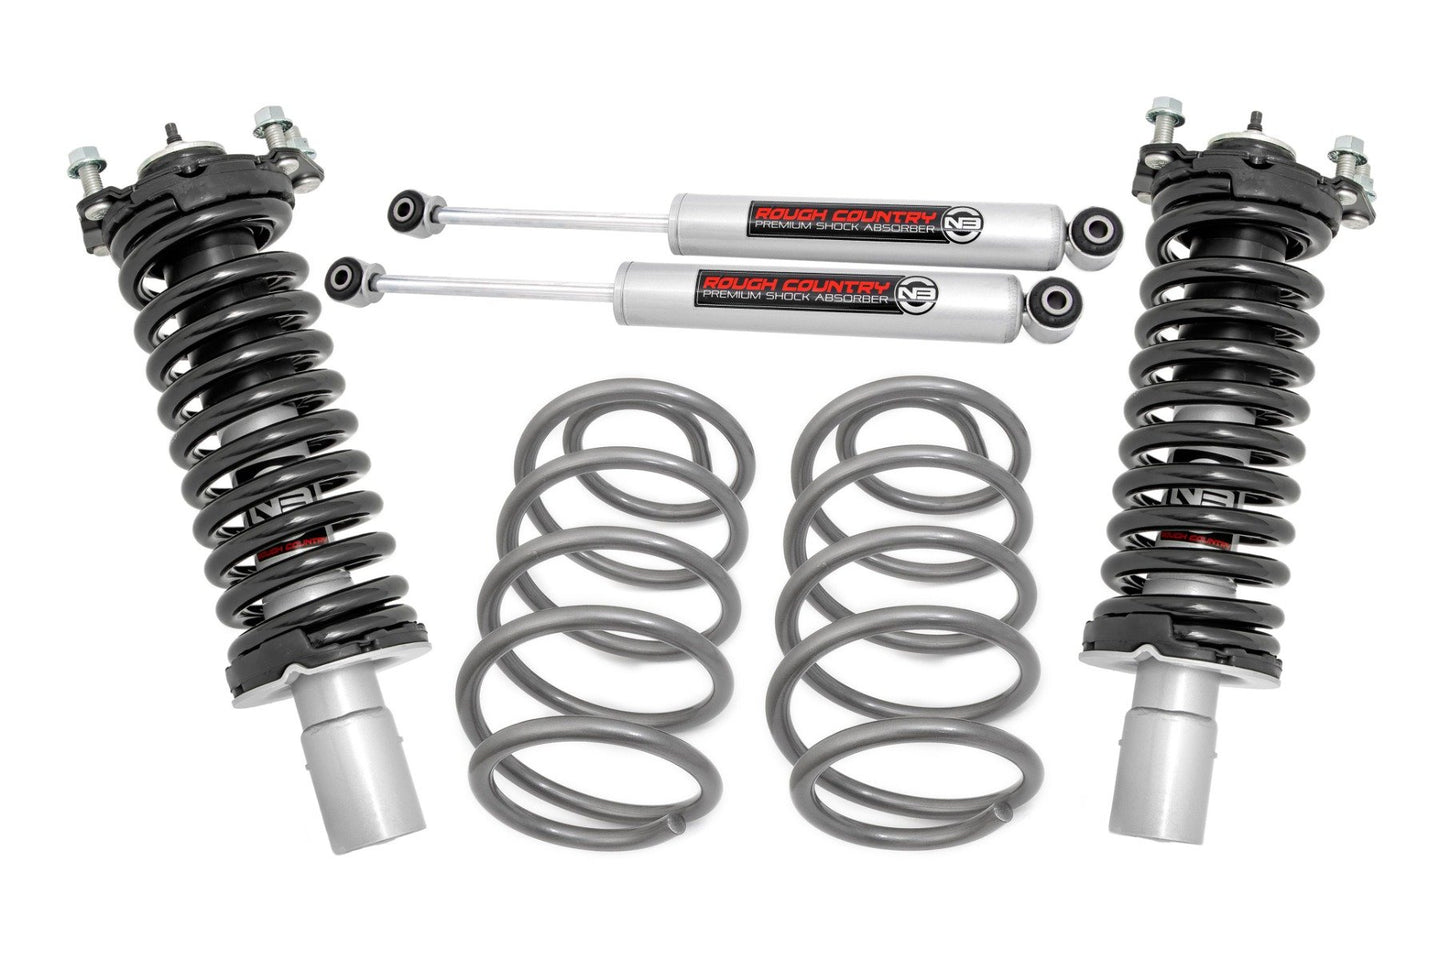 Rough Country (68731) 2.5 Inch Lift Kit | N3 Front Struts | Jeep Liberty KK 4WD (2008-2012)